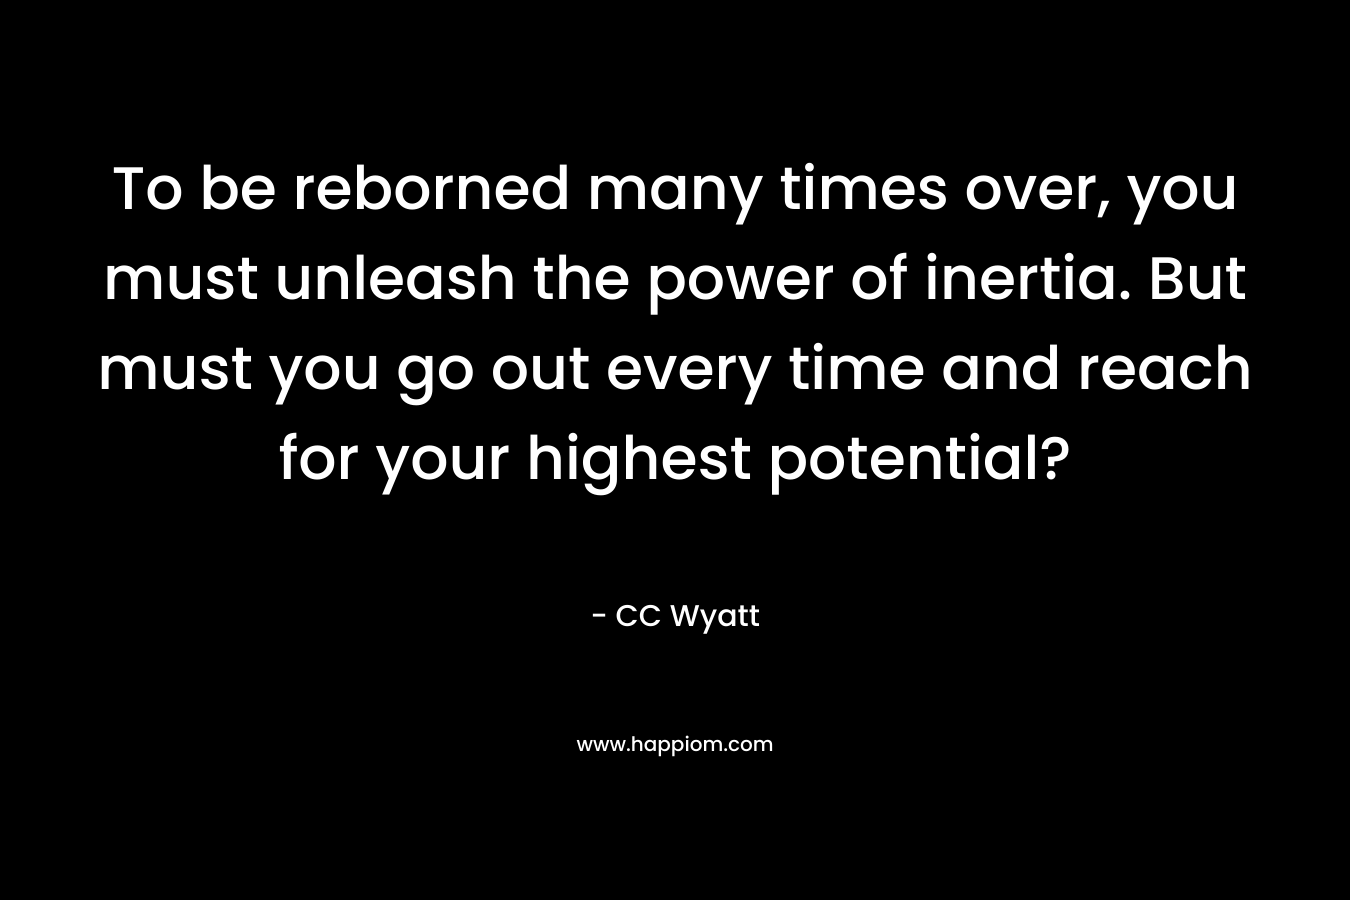 To be reborned many times over, you must unleash the power of inertia. But must you go out every time and reach for your highest potential?